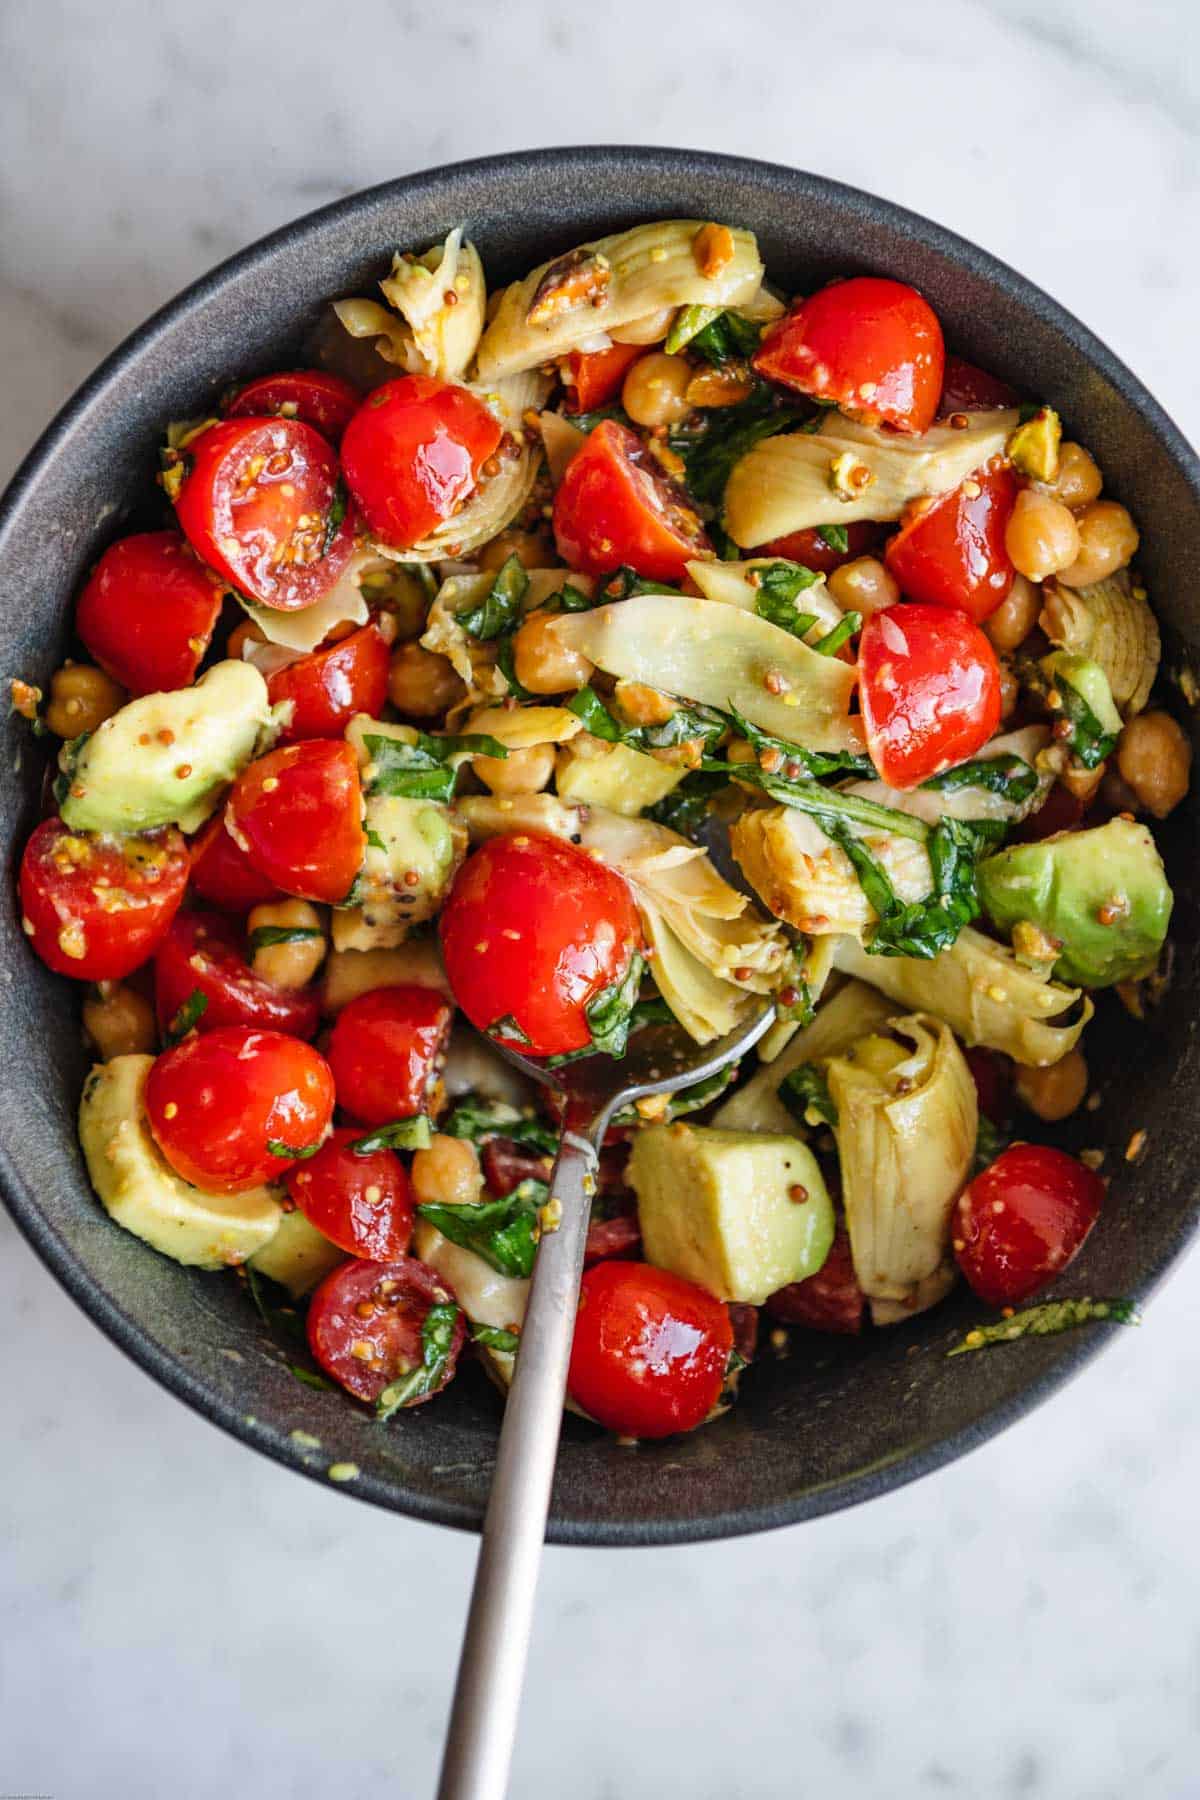 Halved grape tomatoes, avocado chunks, fresh mint and basil, grain mustard dressing, artichoke hearts, chopped pistachios, and chickpeas mixed in a bowl.